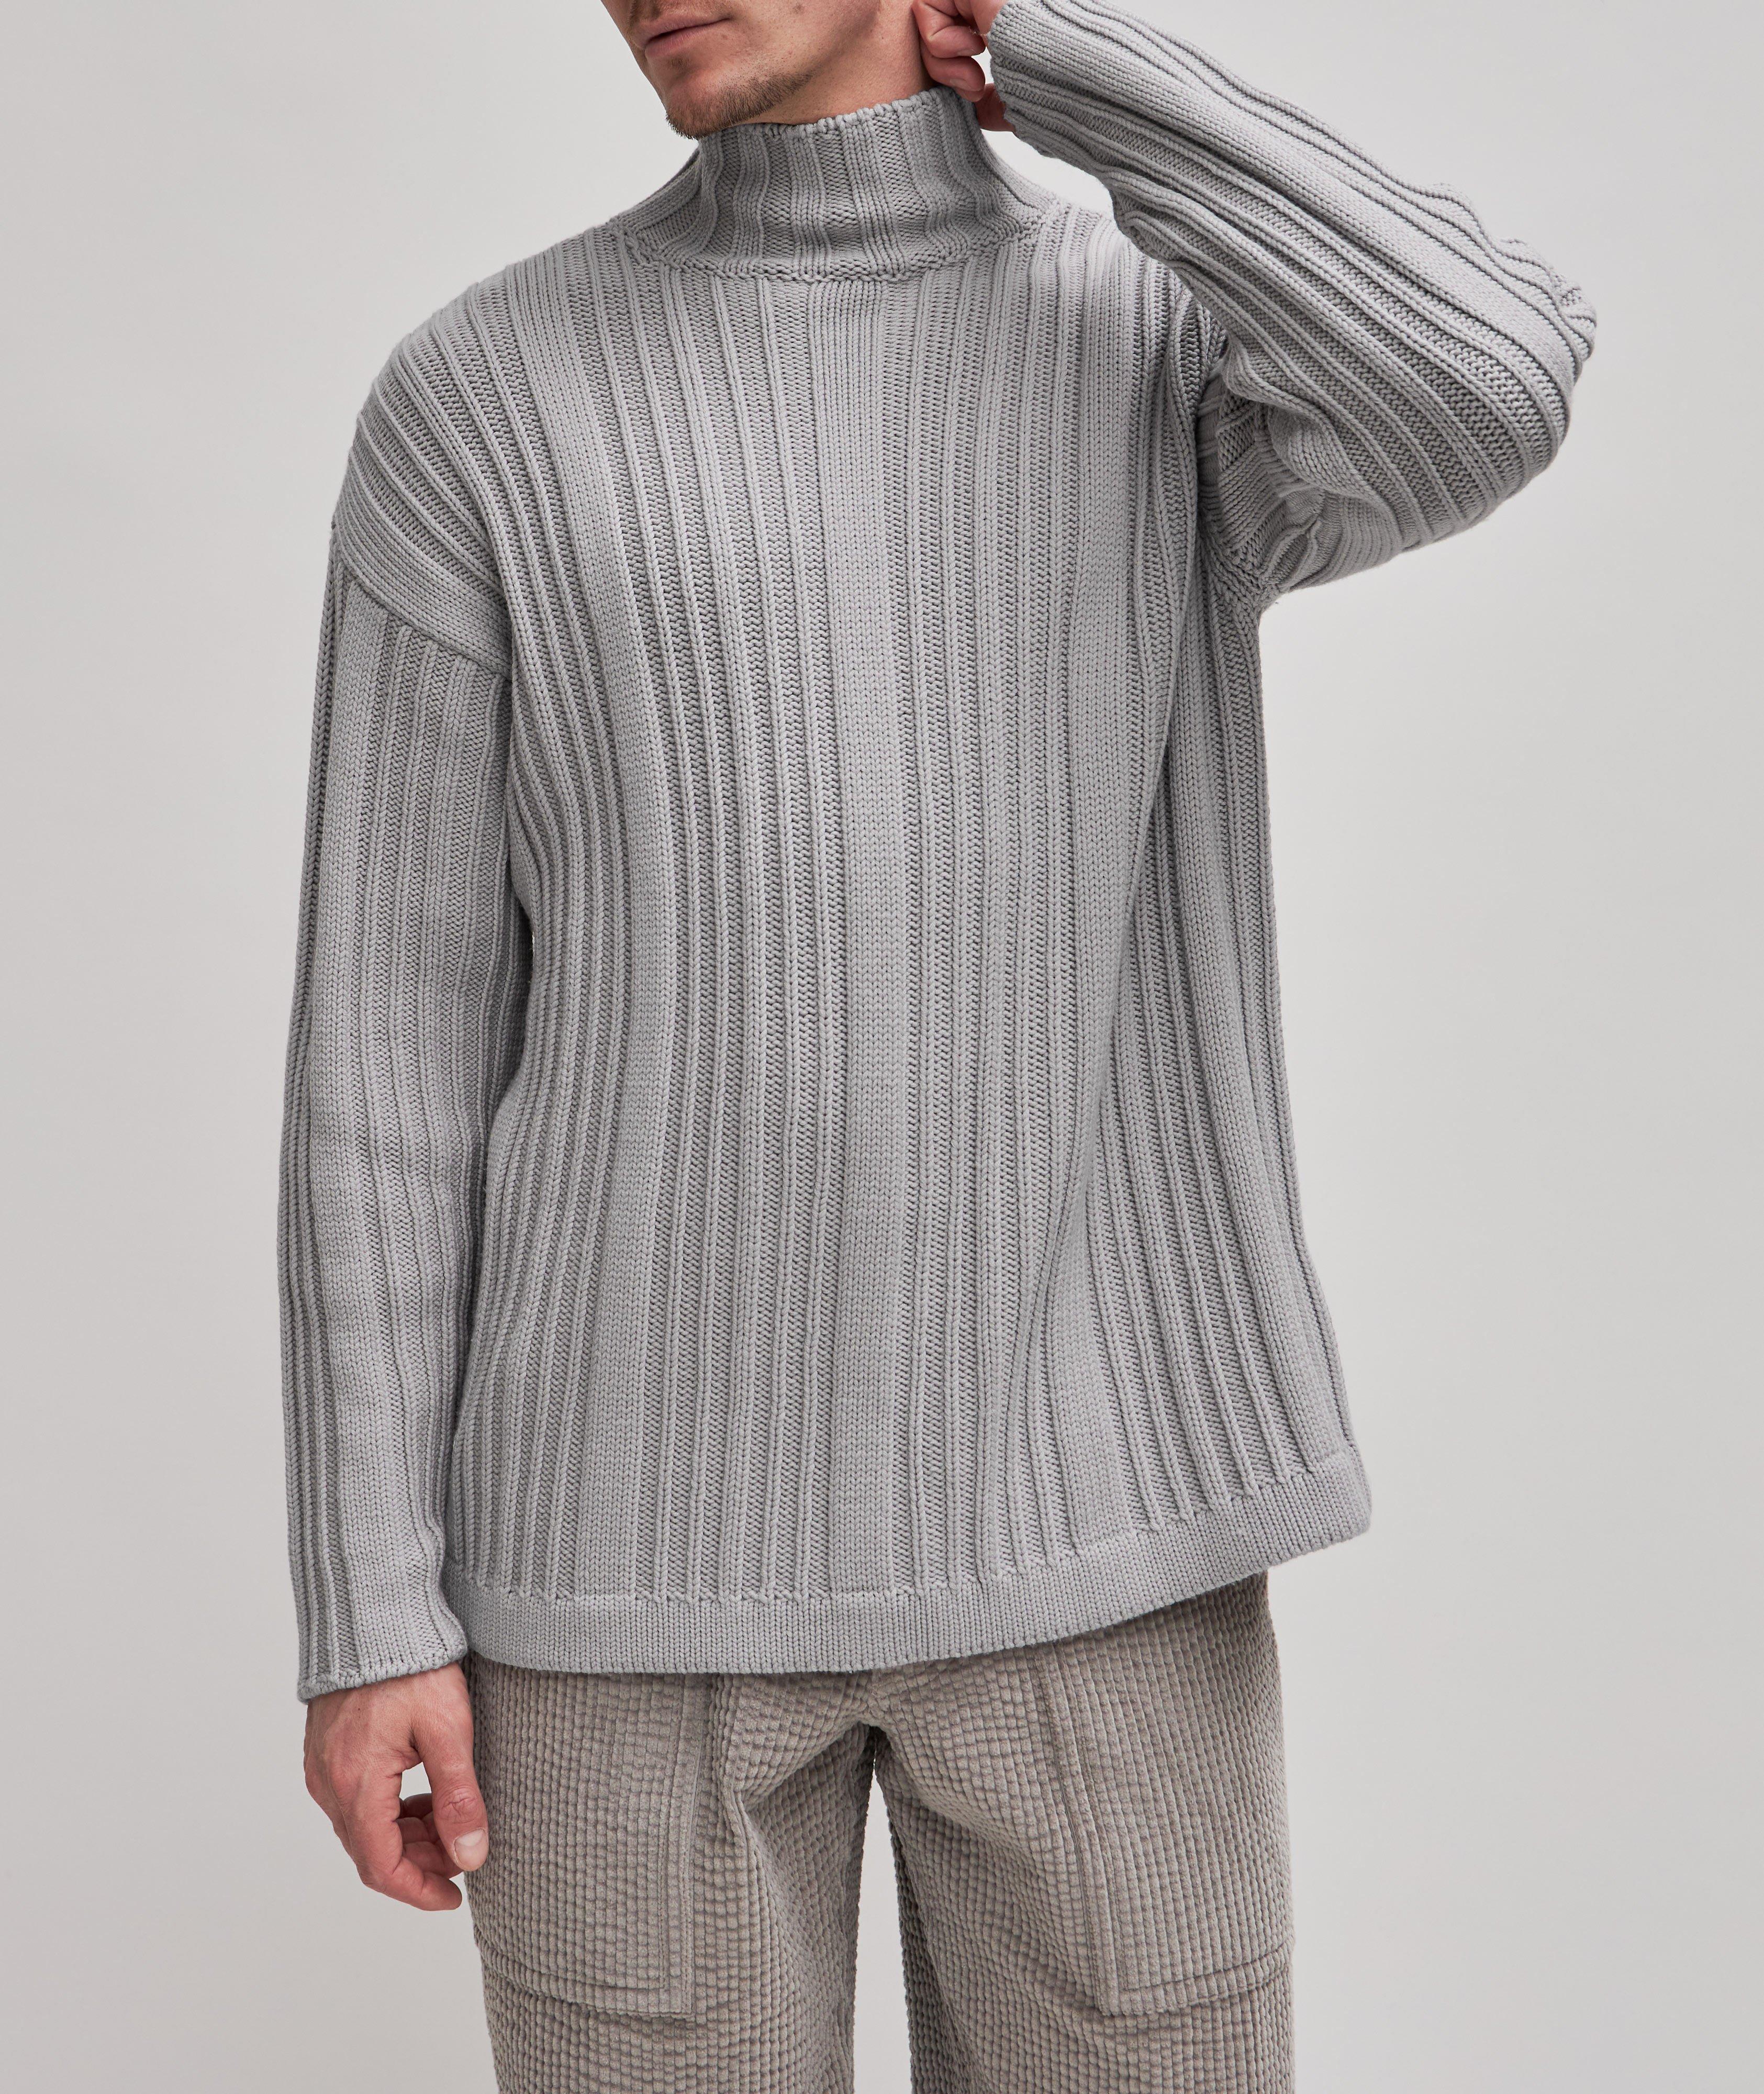 Virgin Wool Thich Rib-Knitted Turtleneck Sweater image 1